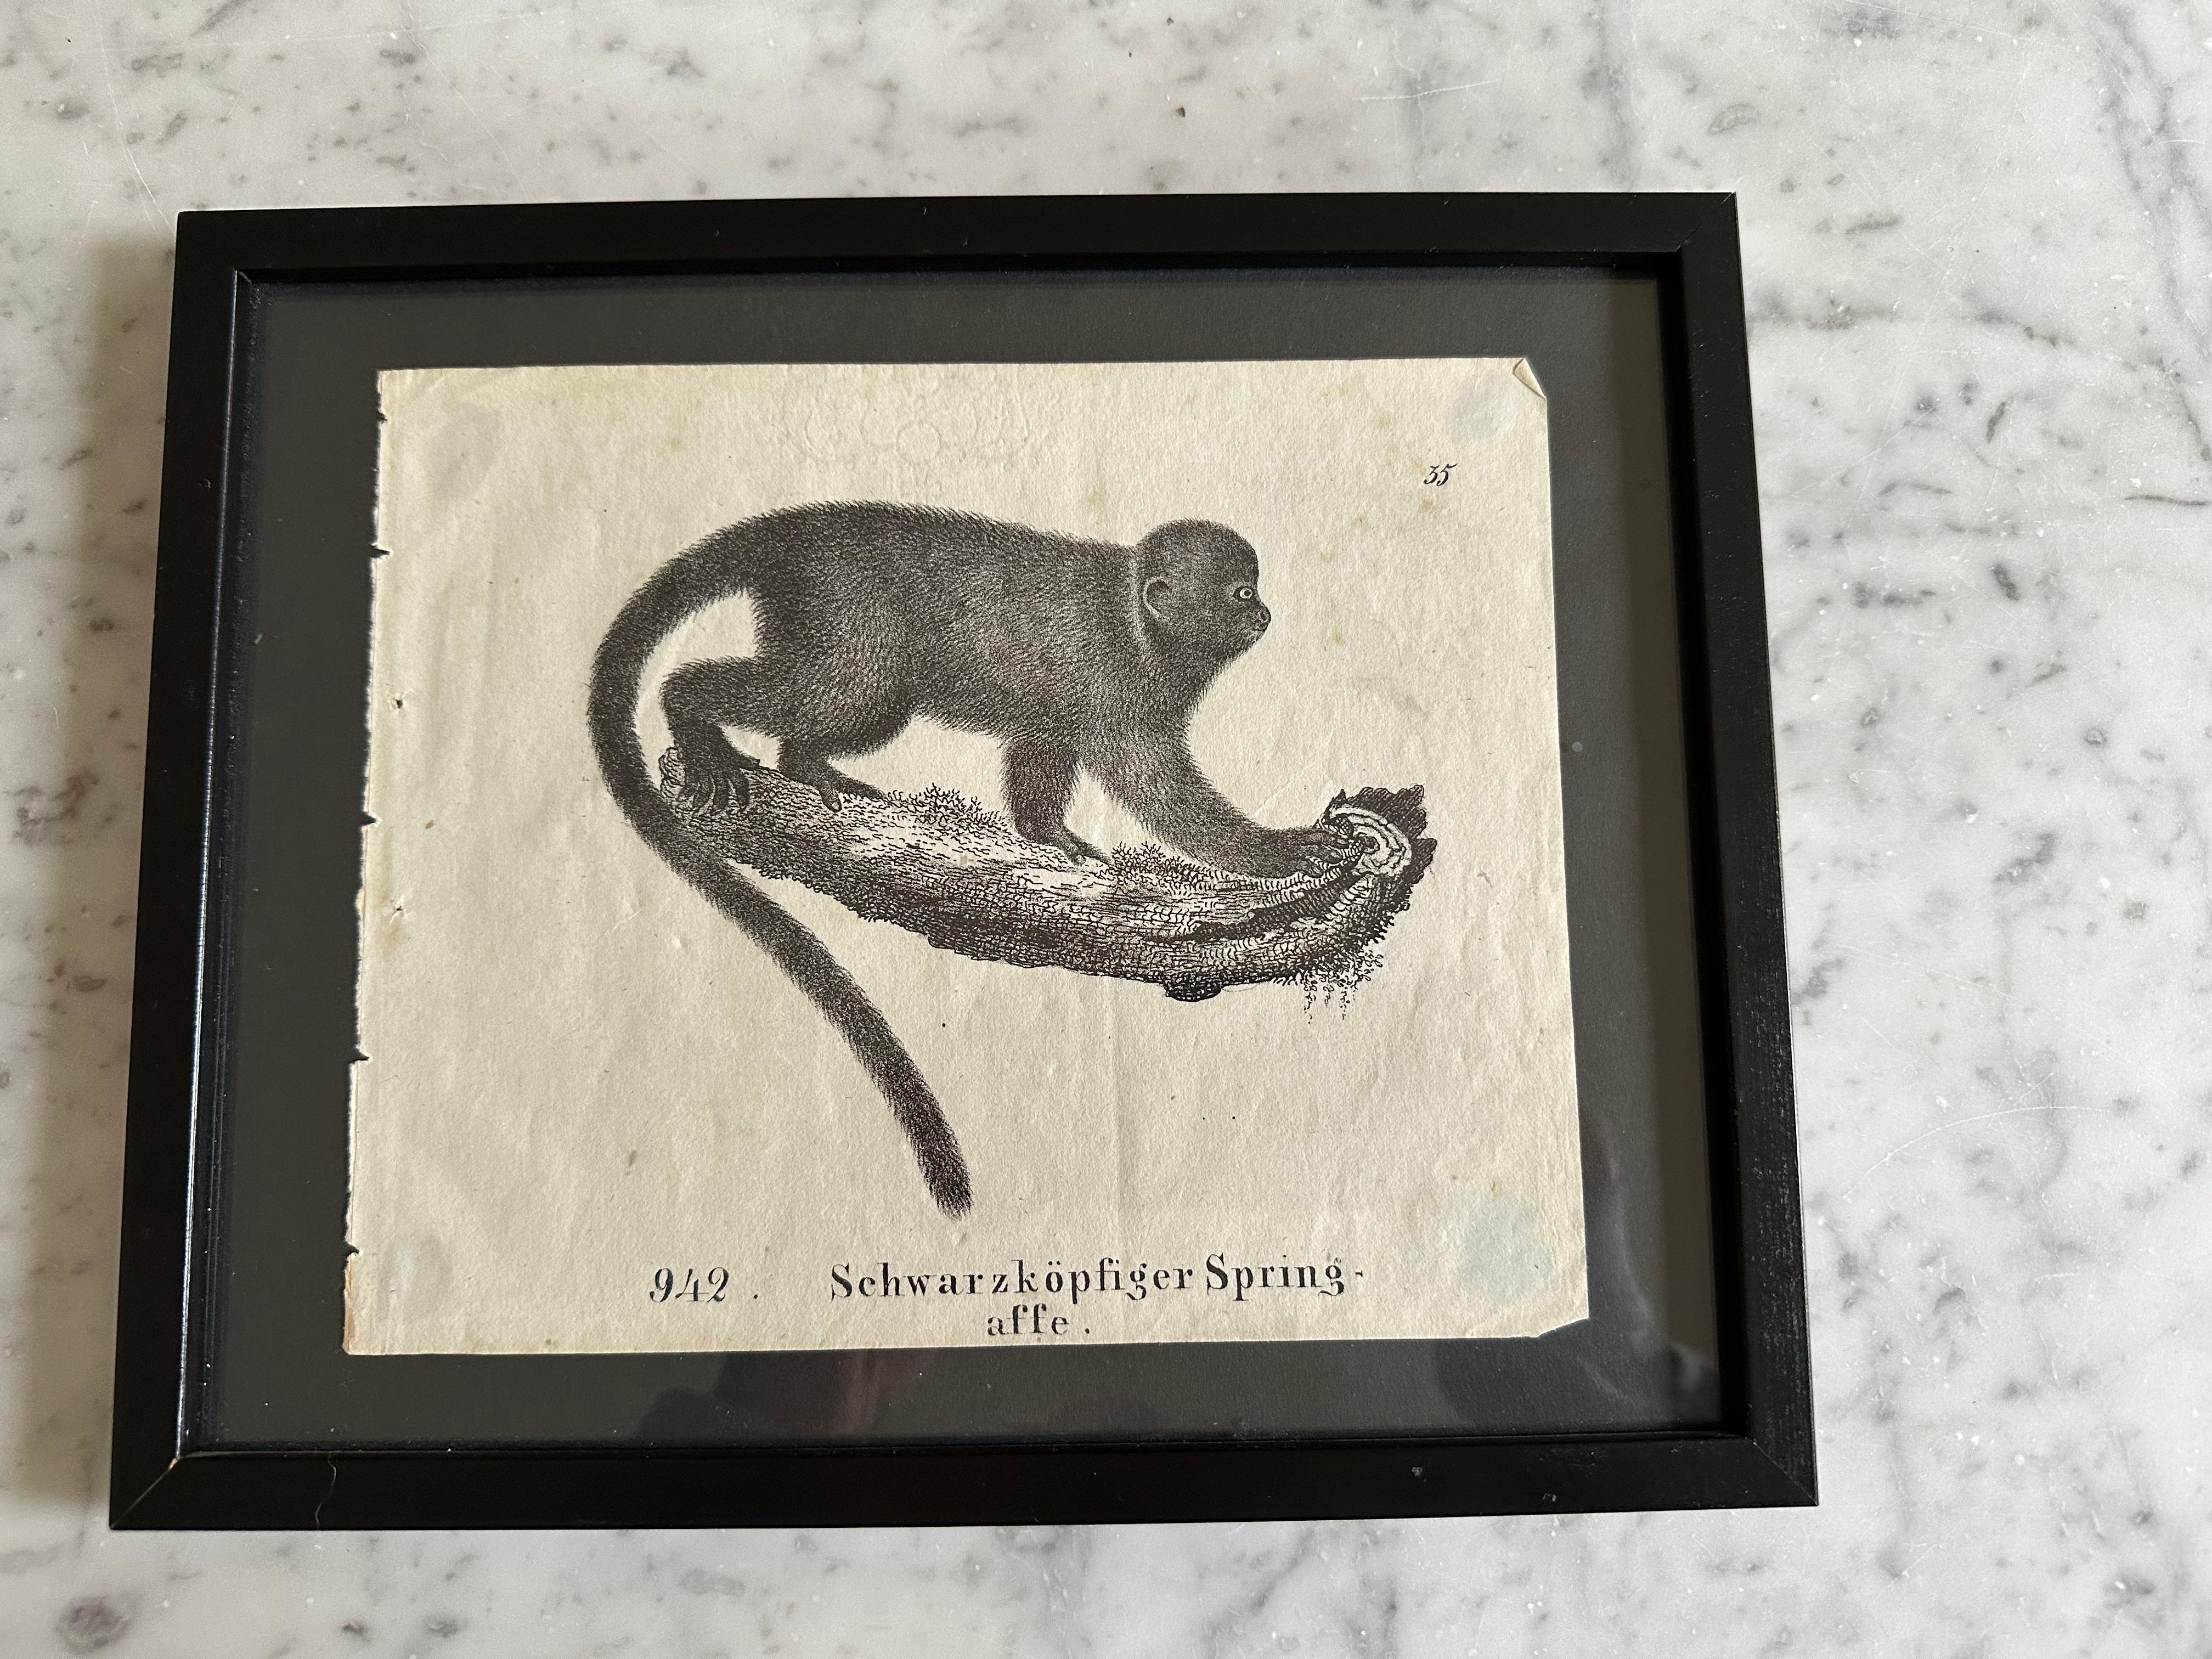 German Zoological Original Lithograph Featuring a Monkey from 1831-35 For Sale